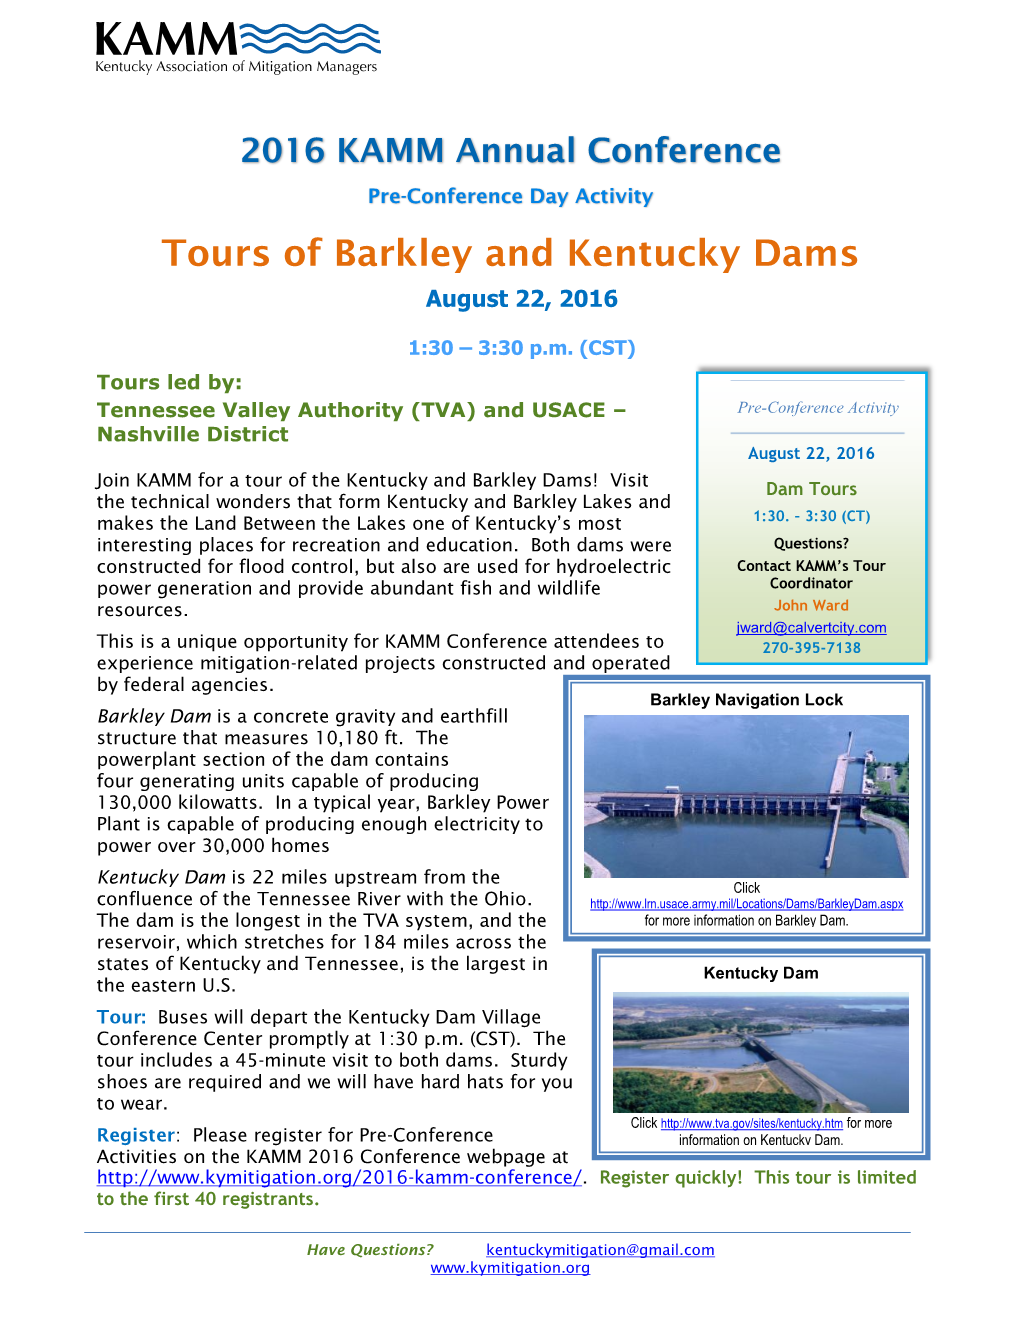 Tours of Barkley and Kentucky Dams August 22, 2016